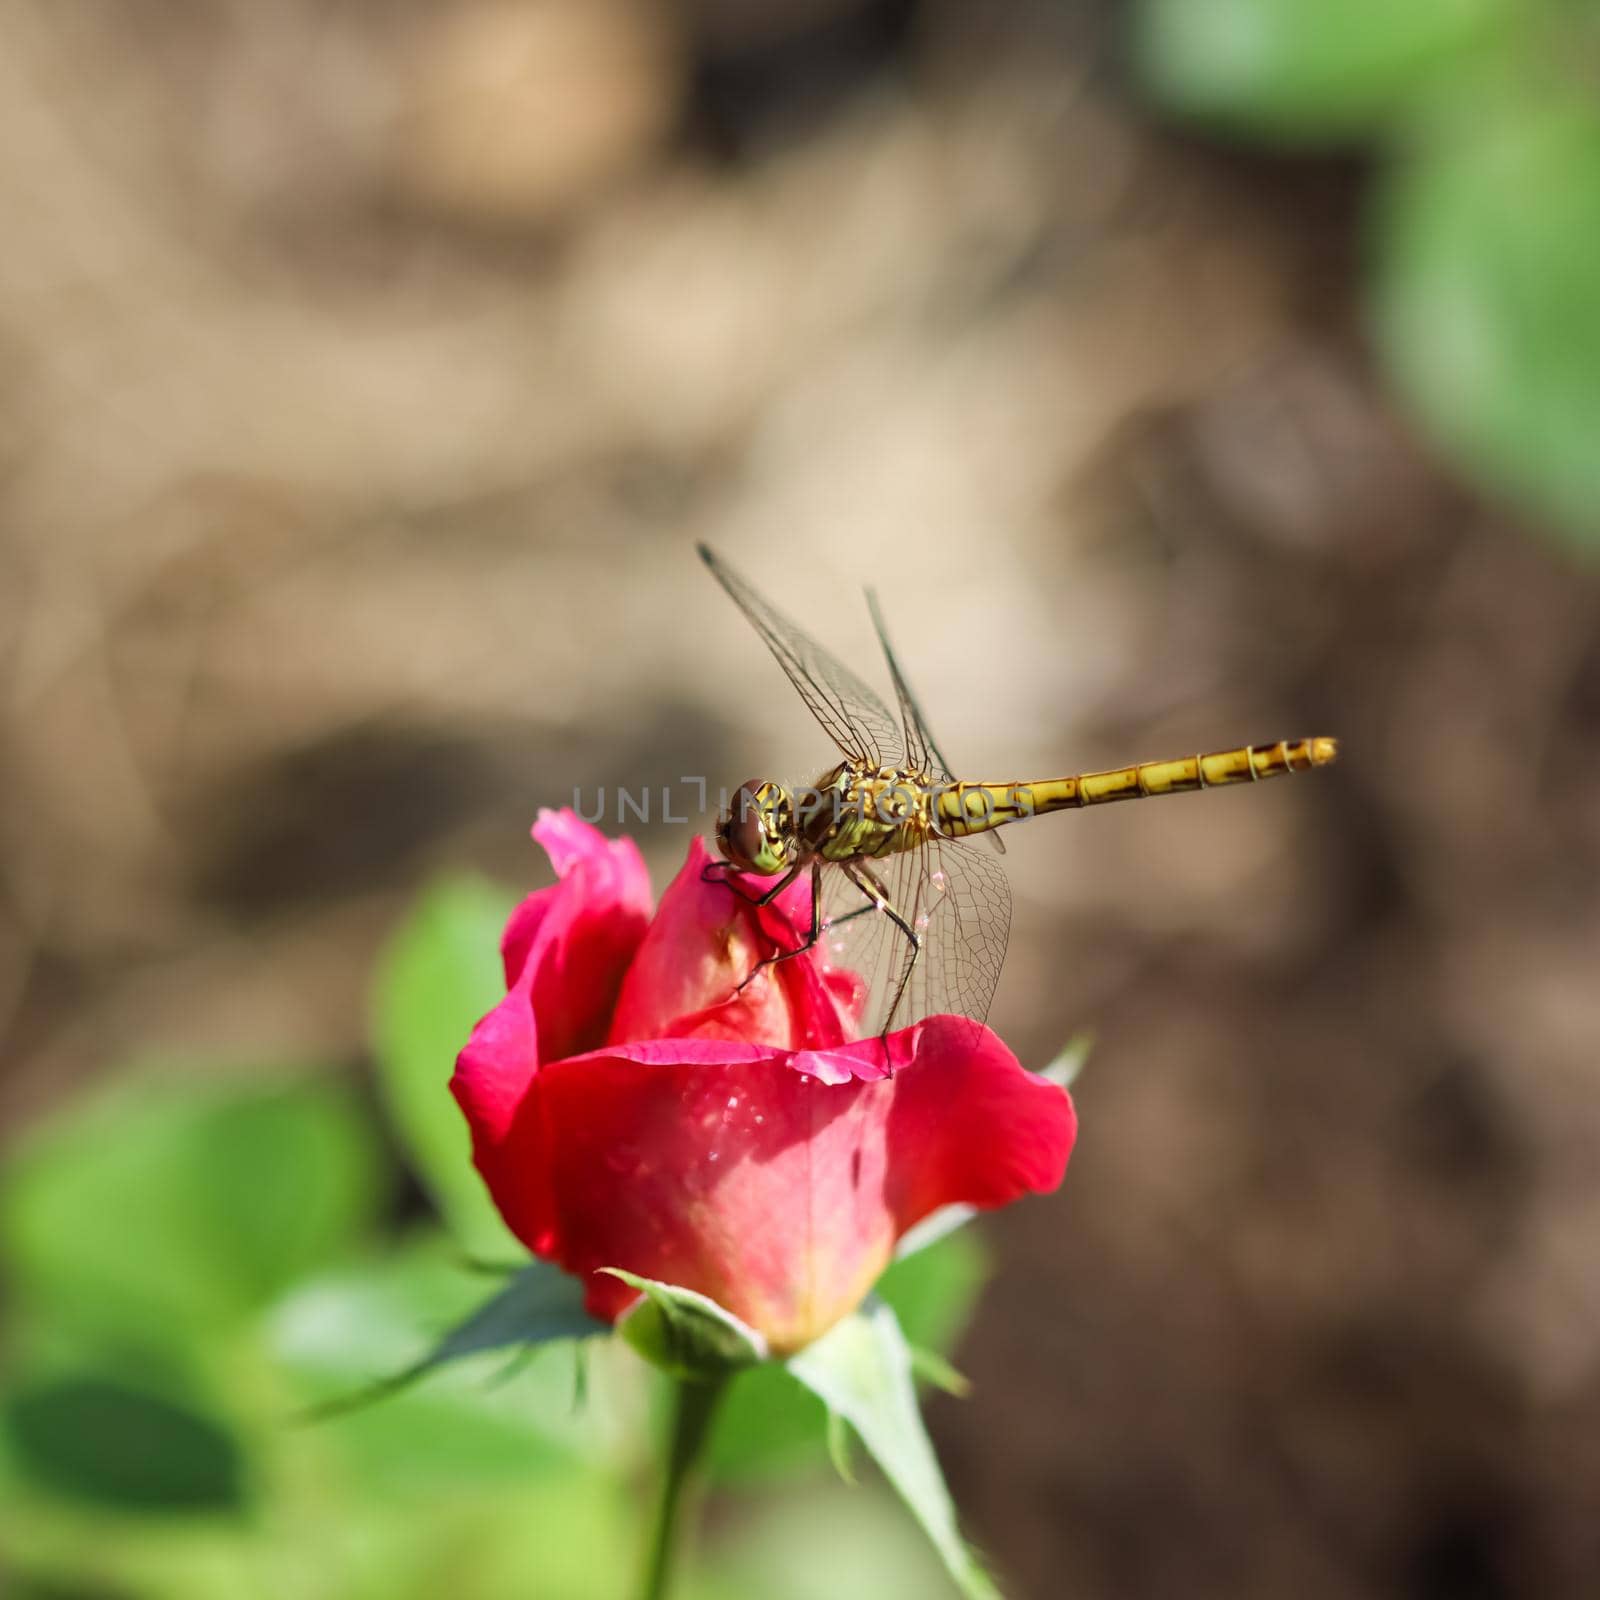 Dragonfly on a red flower rose in sunny garden. by Olayola